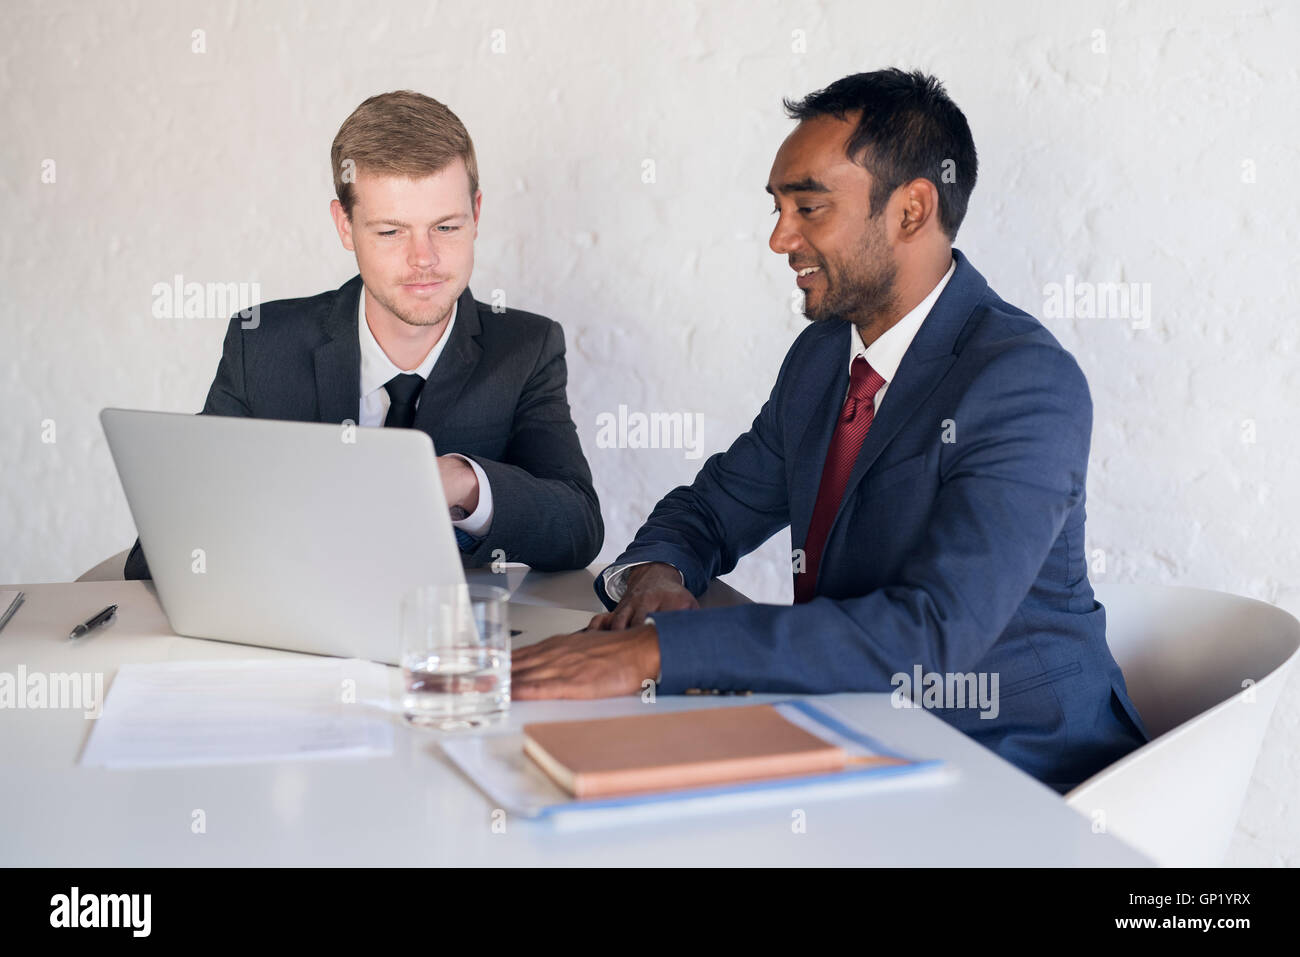 Corporate synergy in the boardroom Stock Photo